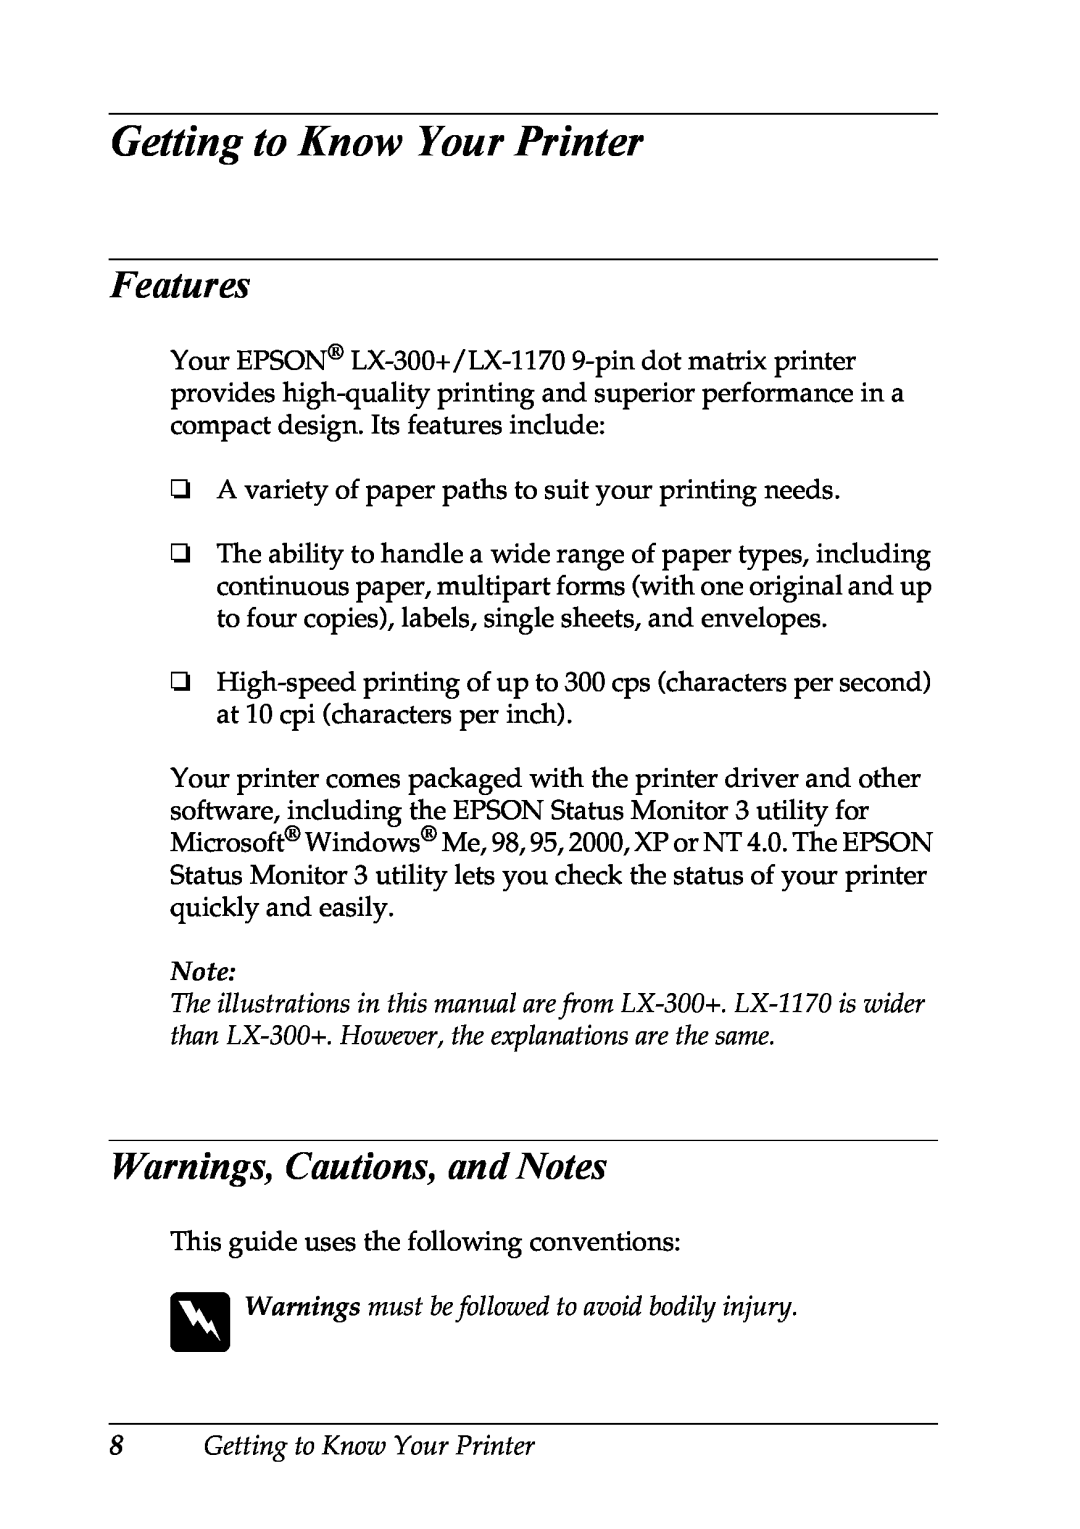 Epson LX-1170 manual Getting to Know Your Printer, Features, Warnings, Cautions, and Notes 